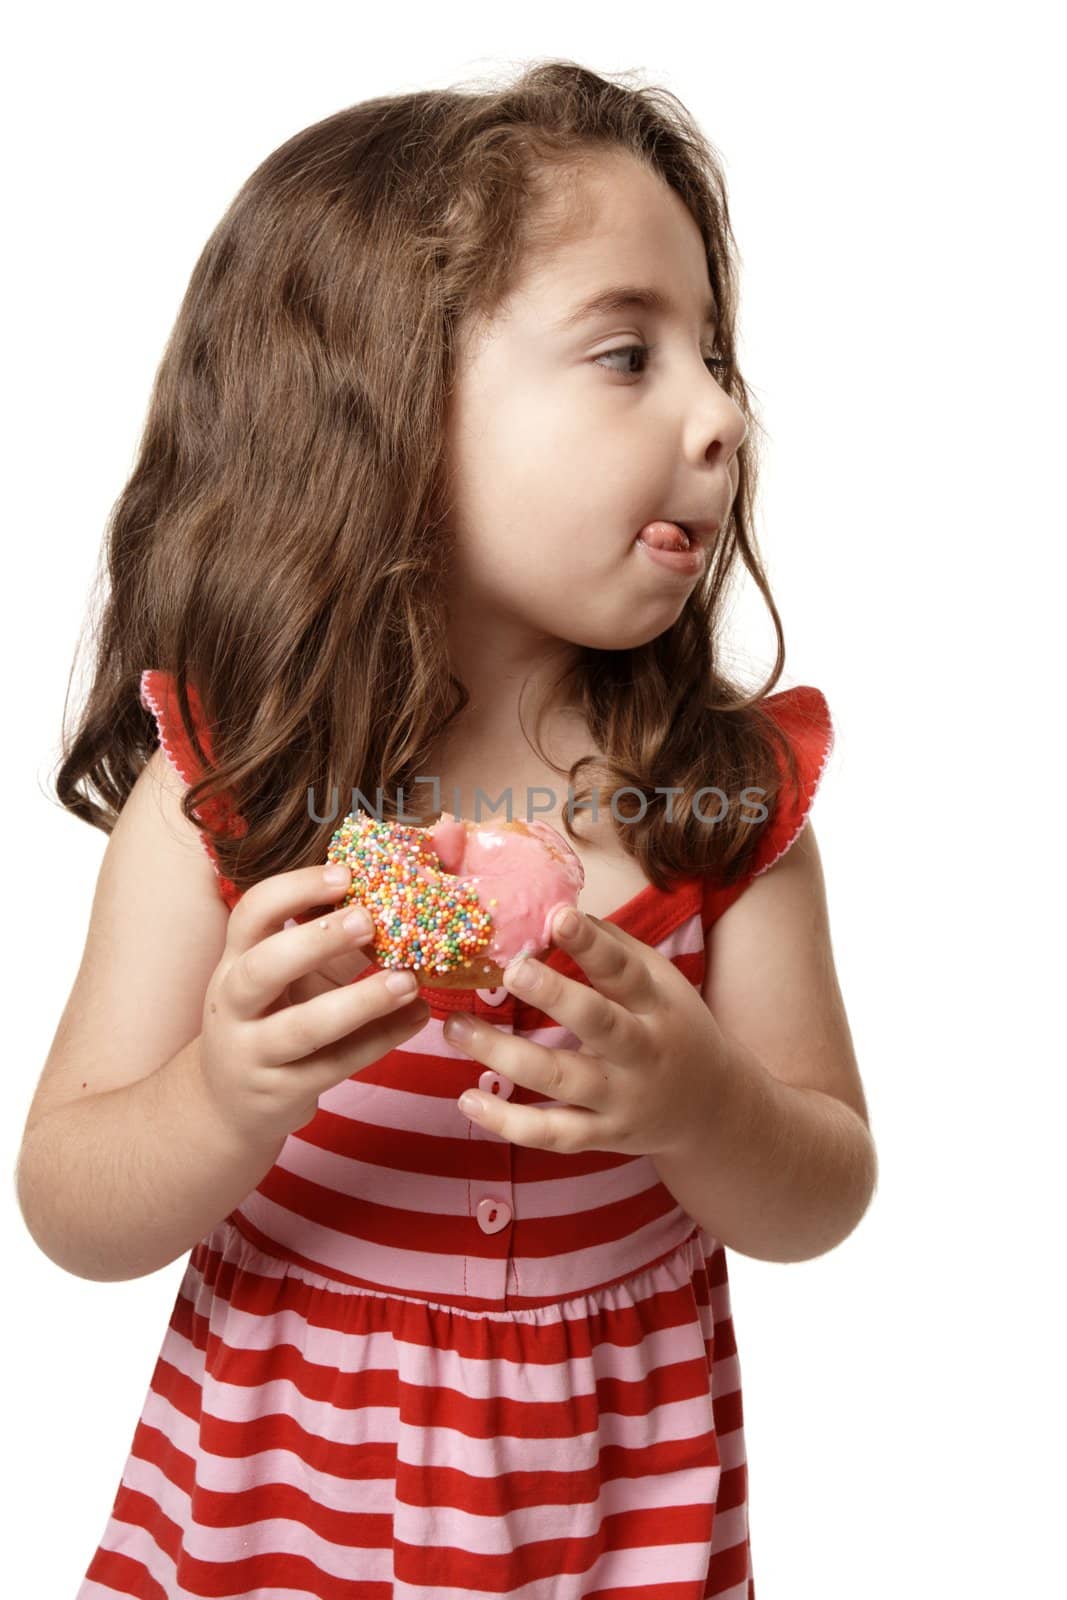 A little girl enjoys a sweet pink iced doughnut.   She is licking her lips and looking sideways.  Suitable for copy.